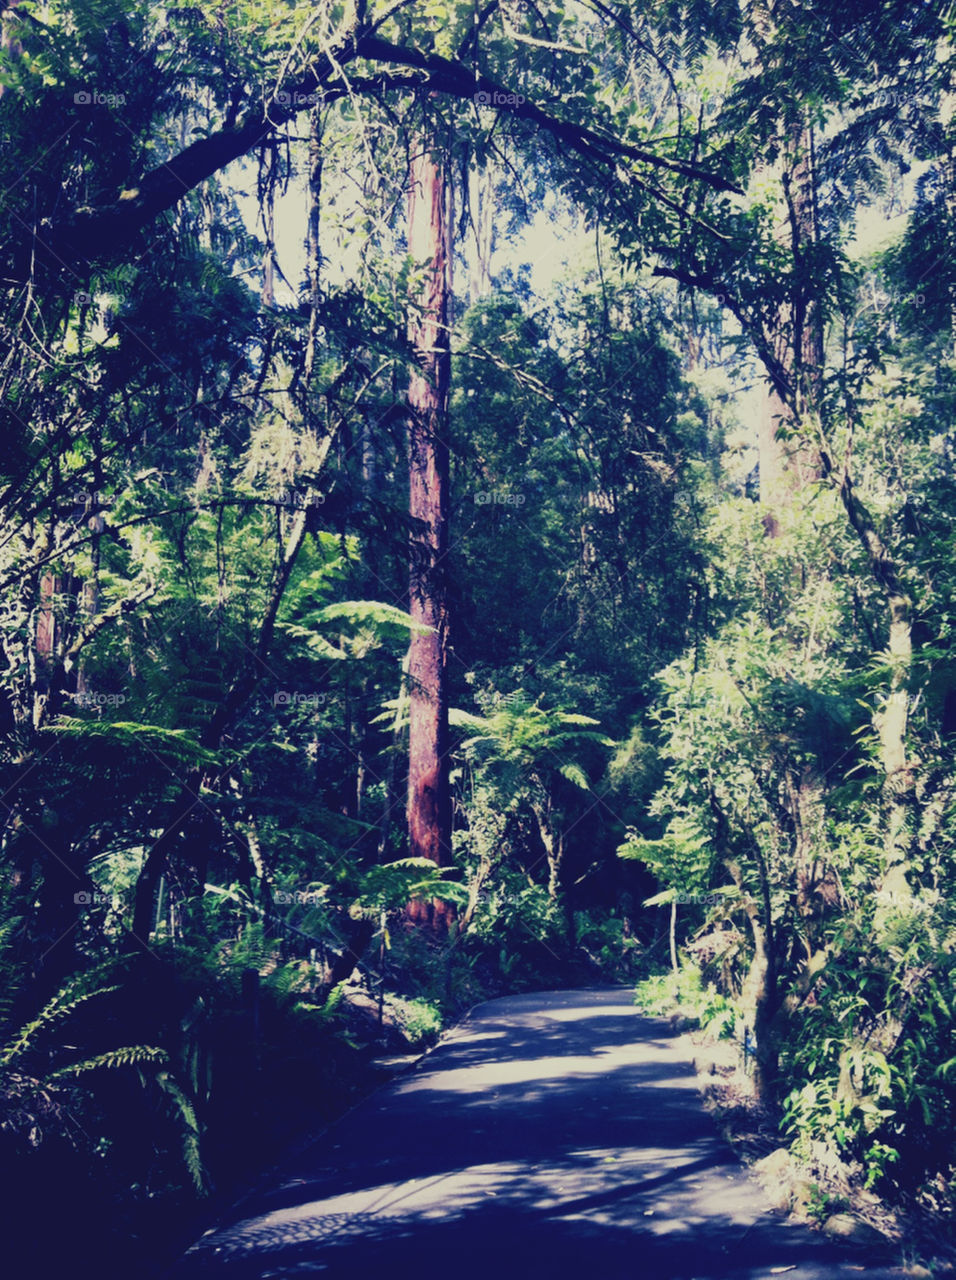 Taken at the beautiful Dandenong Ranges of Victoria on a calm day in